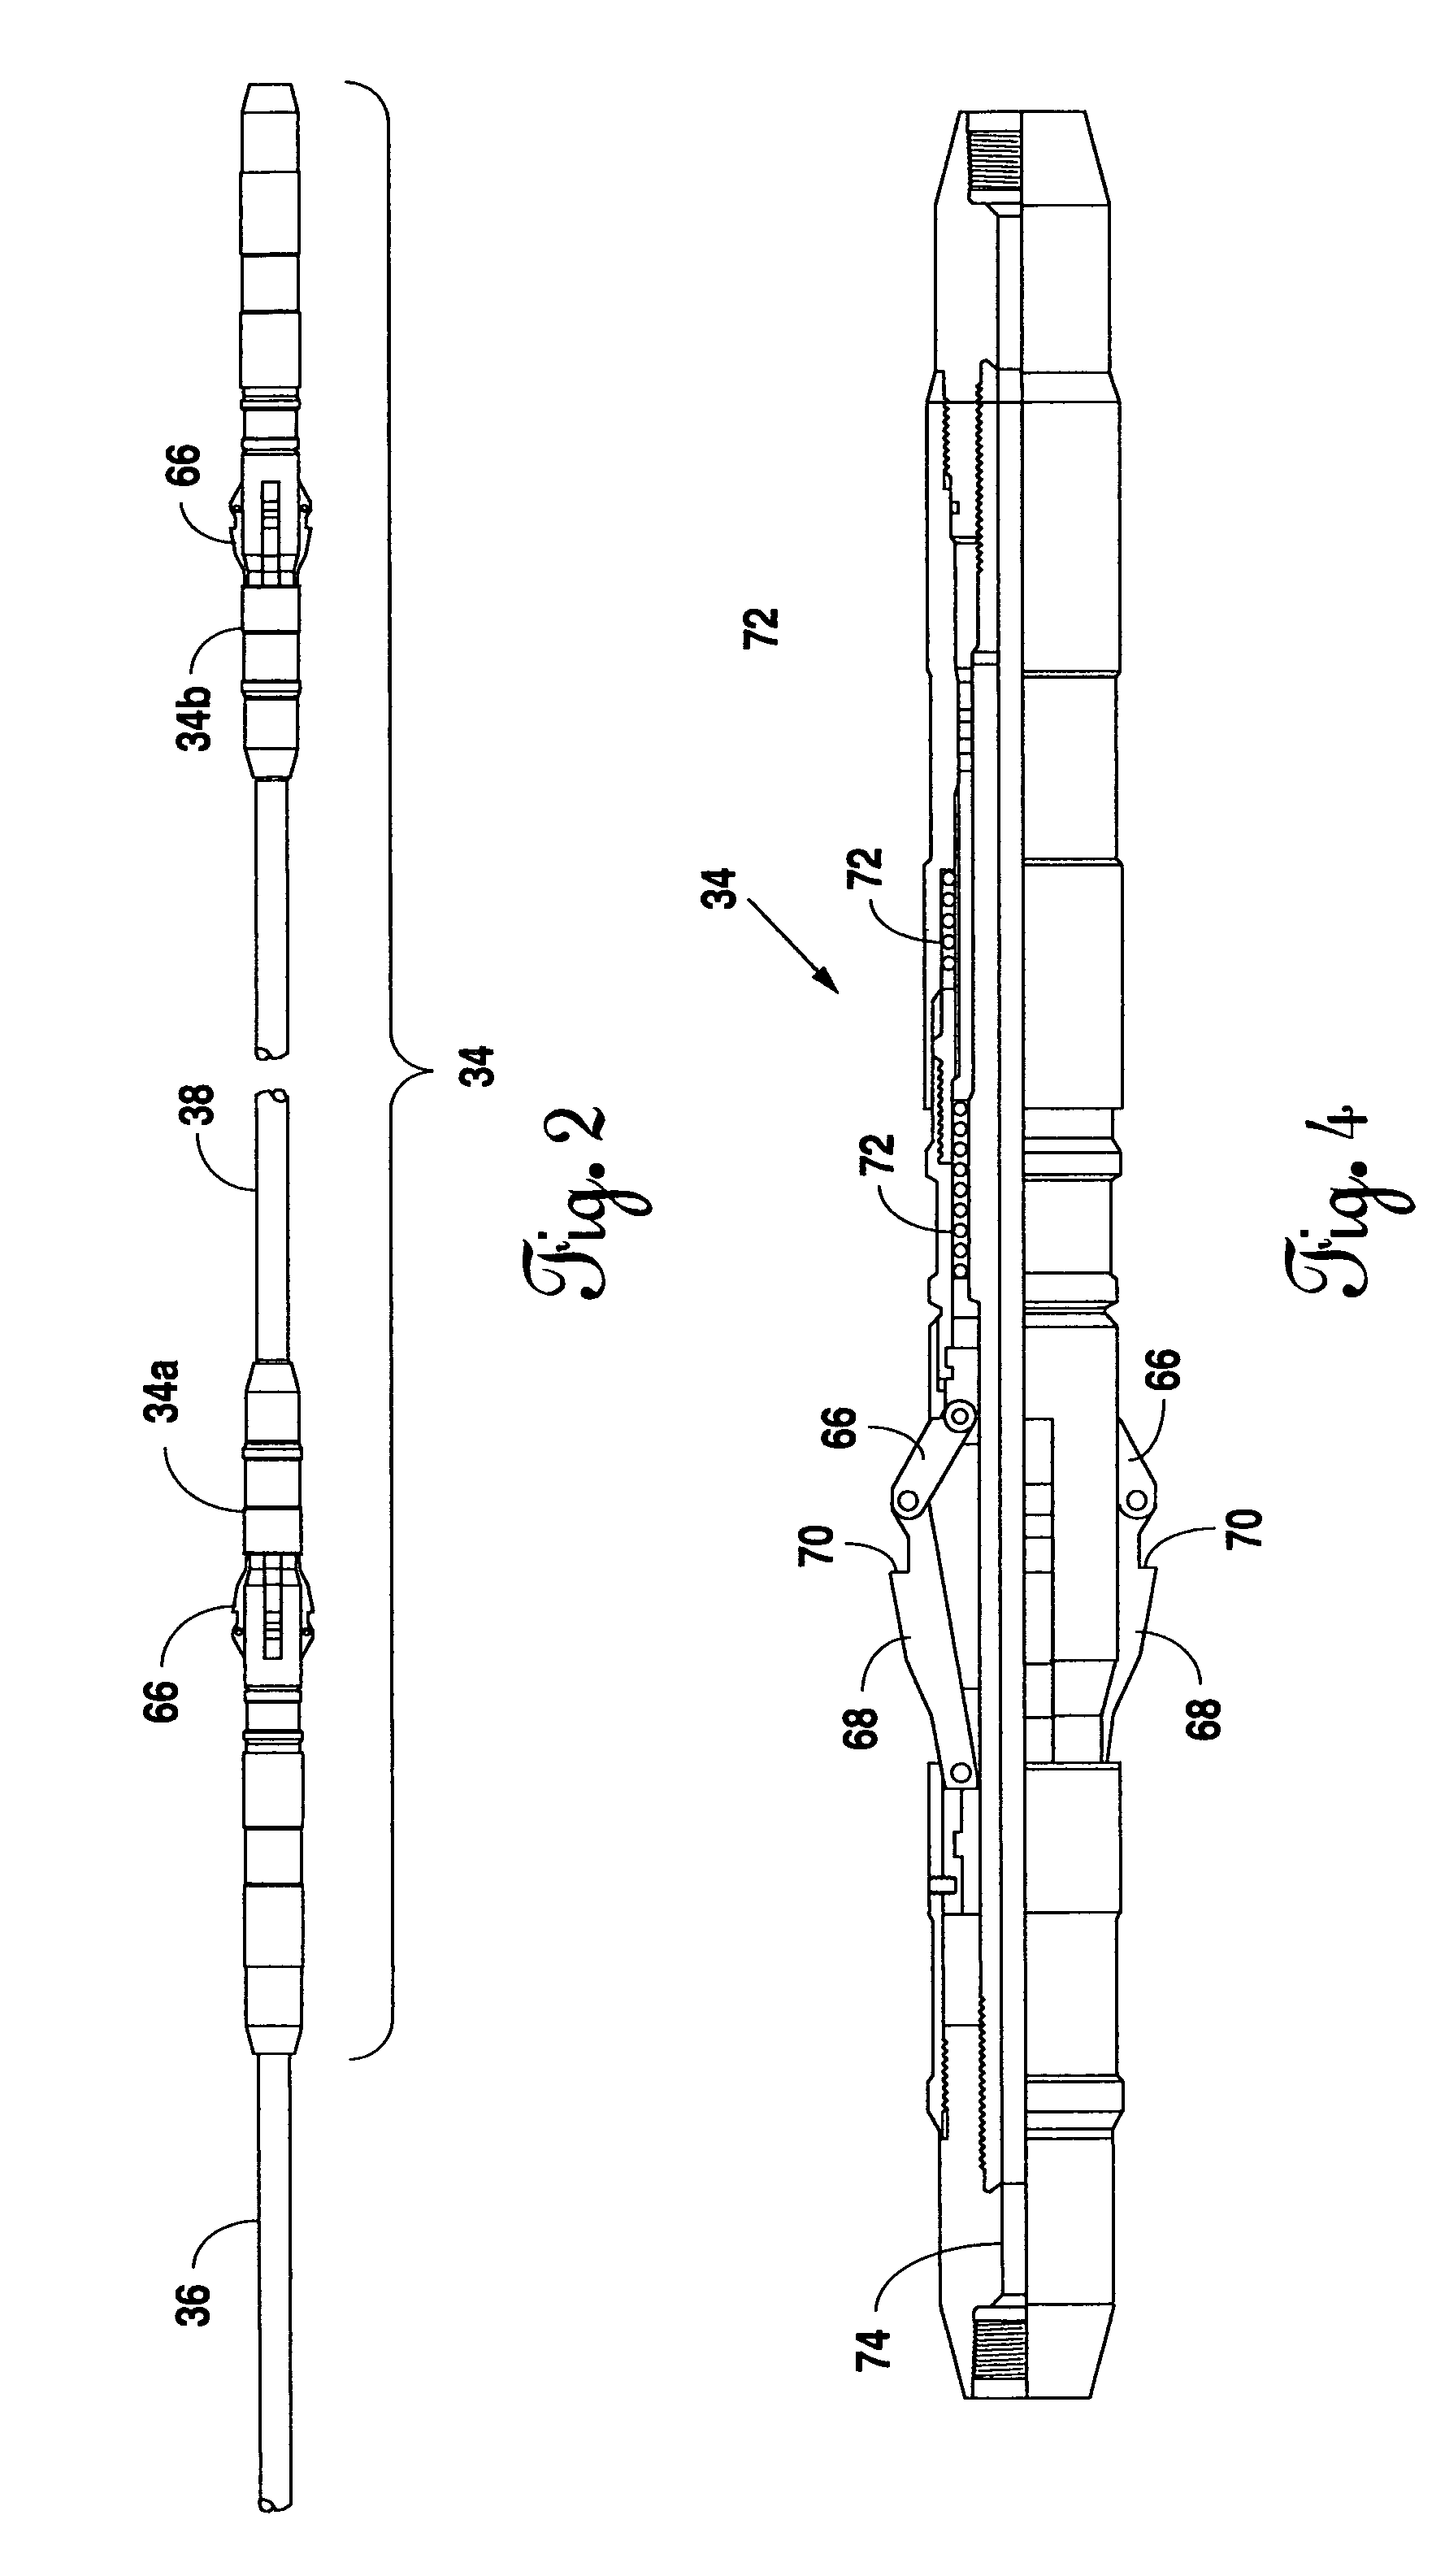 Method and apparatus for cementing production tubing in a multilateral borehole